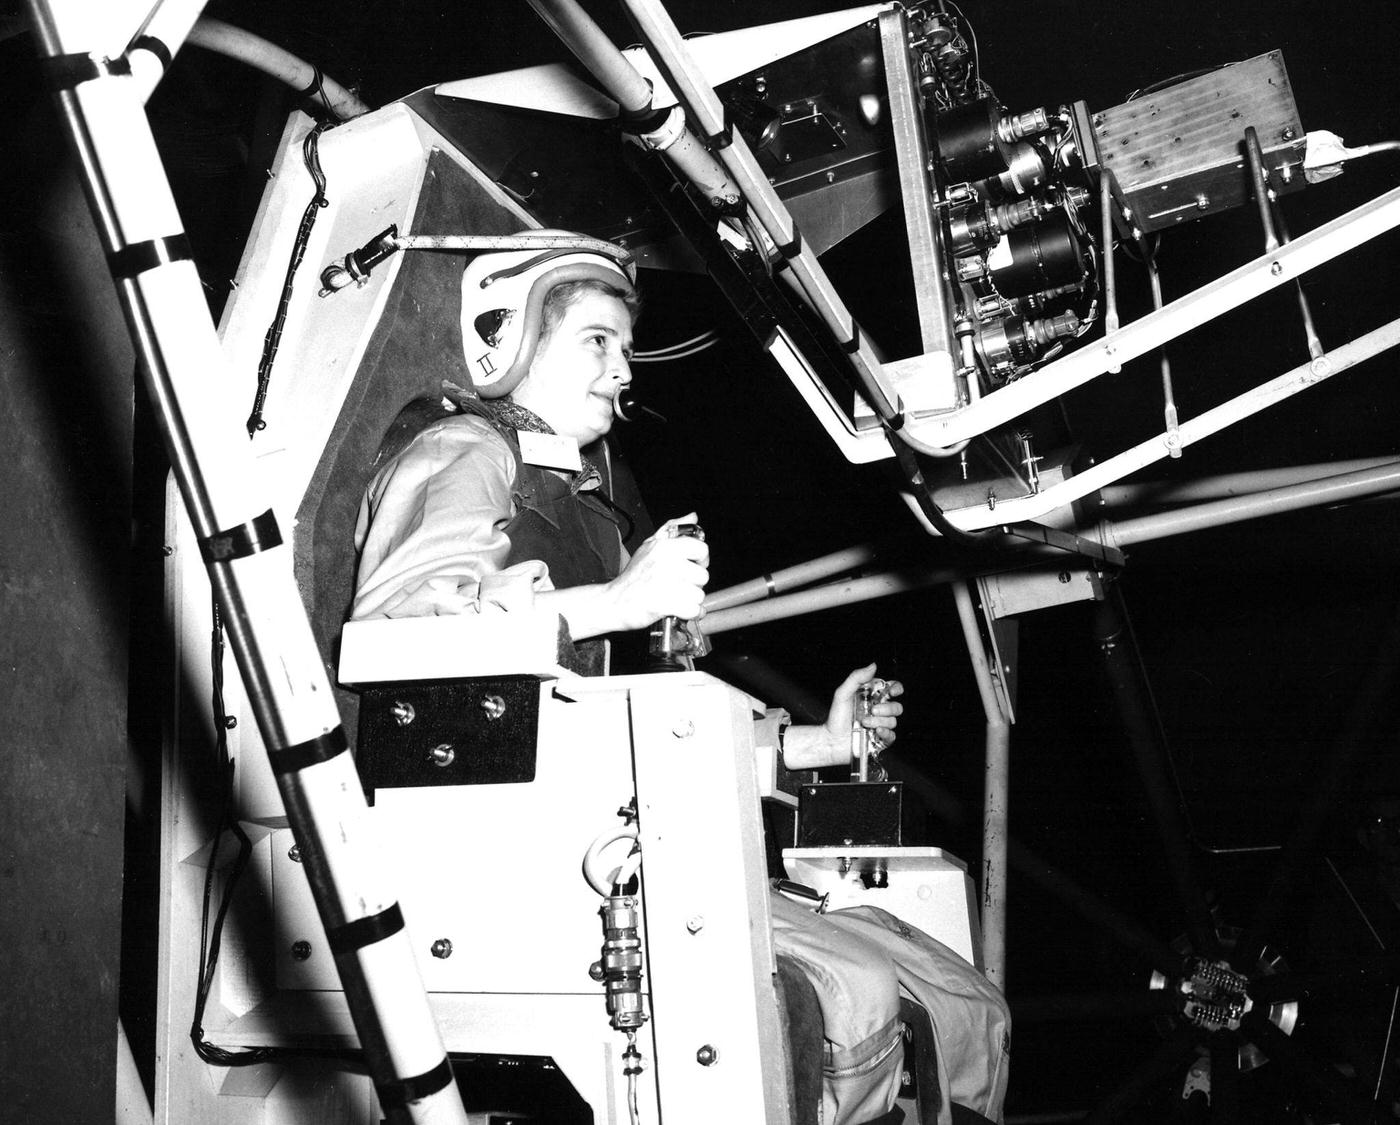 Jerrie Cobb Testing Gimbal Rig in Altitude Wind Tunnel, 1960